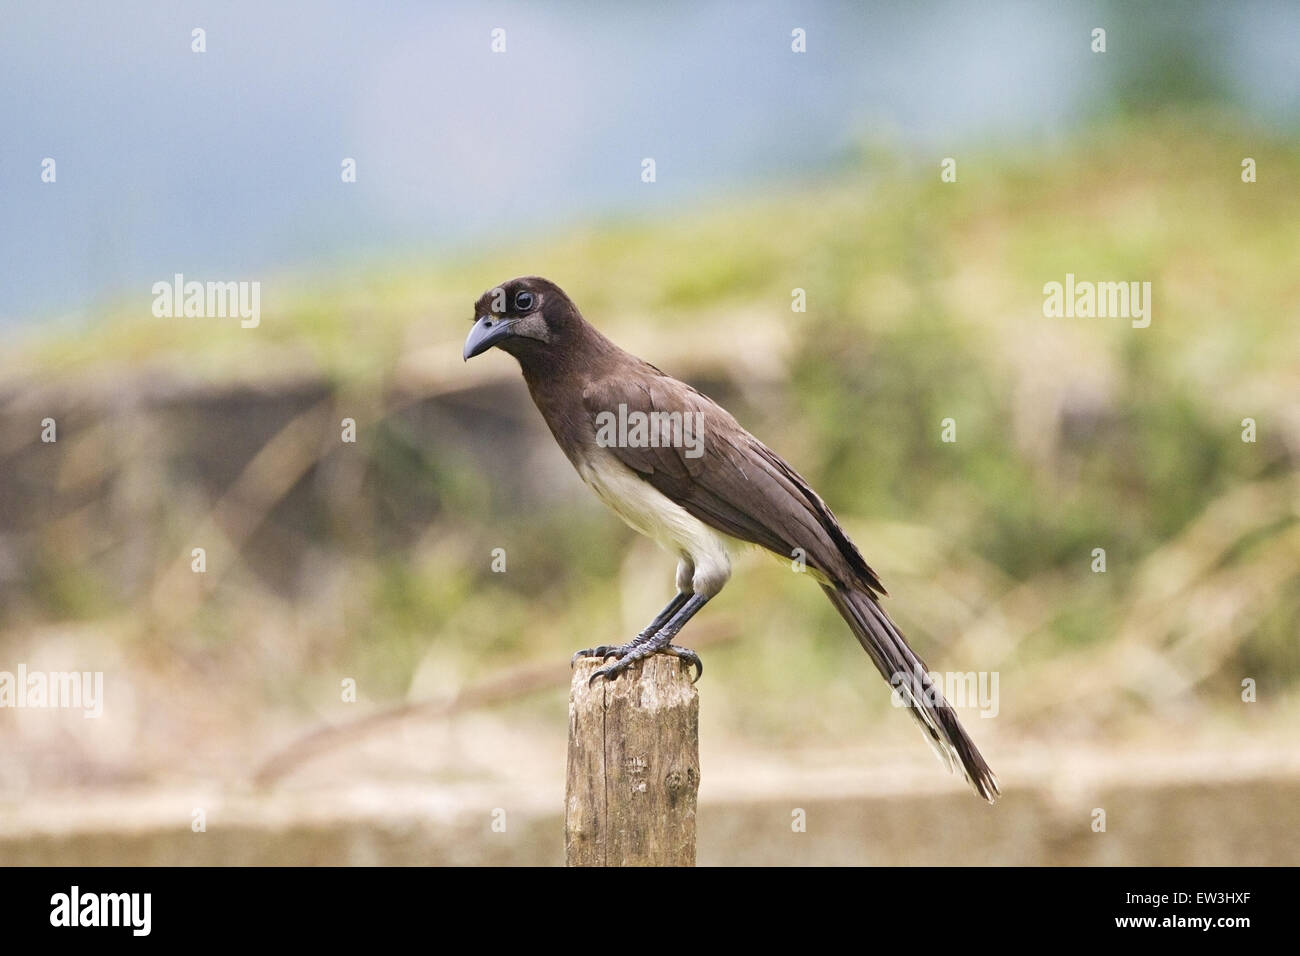 Brown Jay (Psilorhinus morio) adult, perched on fencepost, Rancho Naturalista, Costa Rica, April Stock Photo